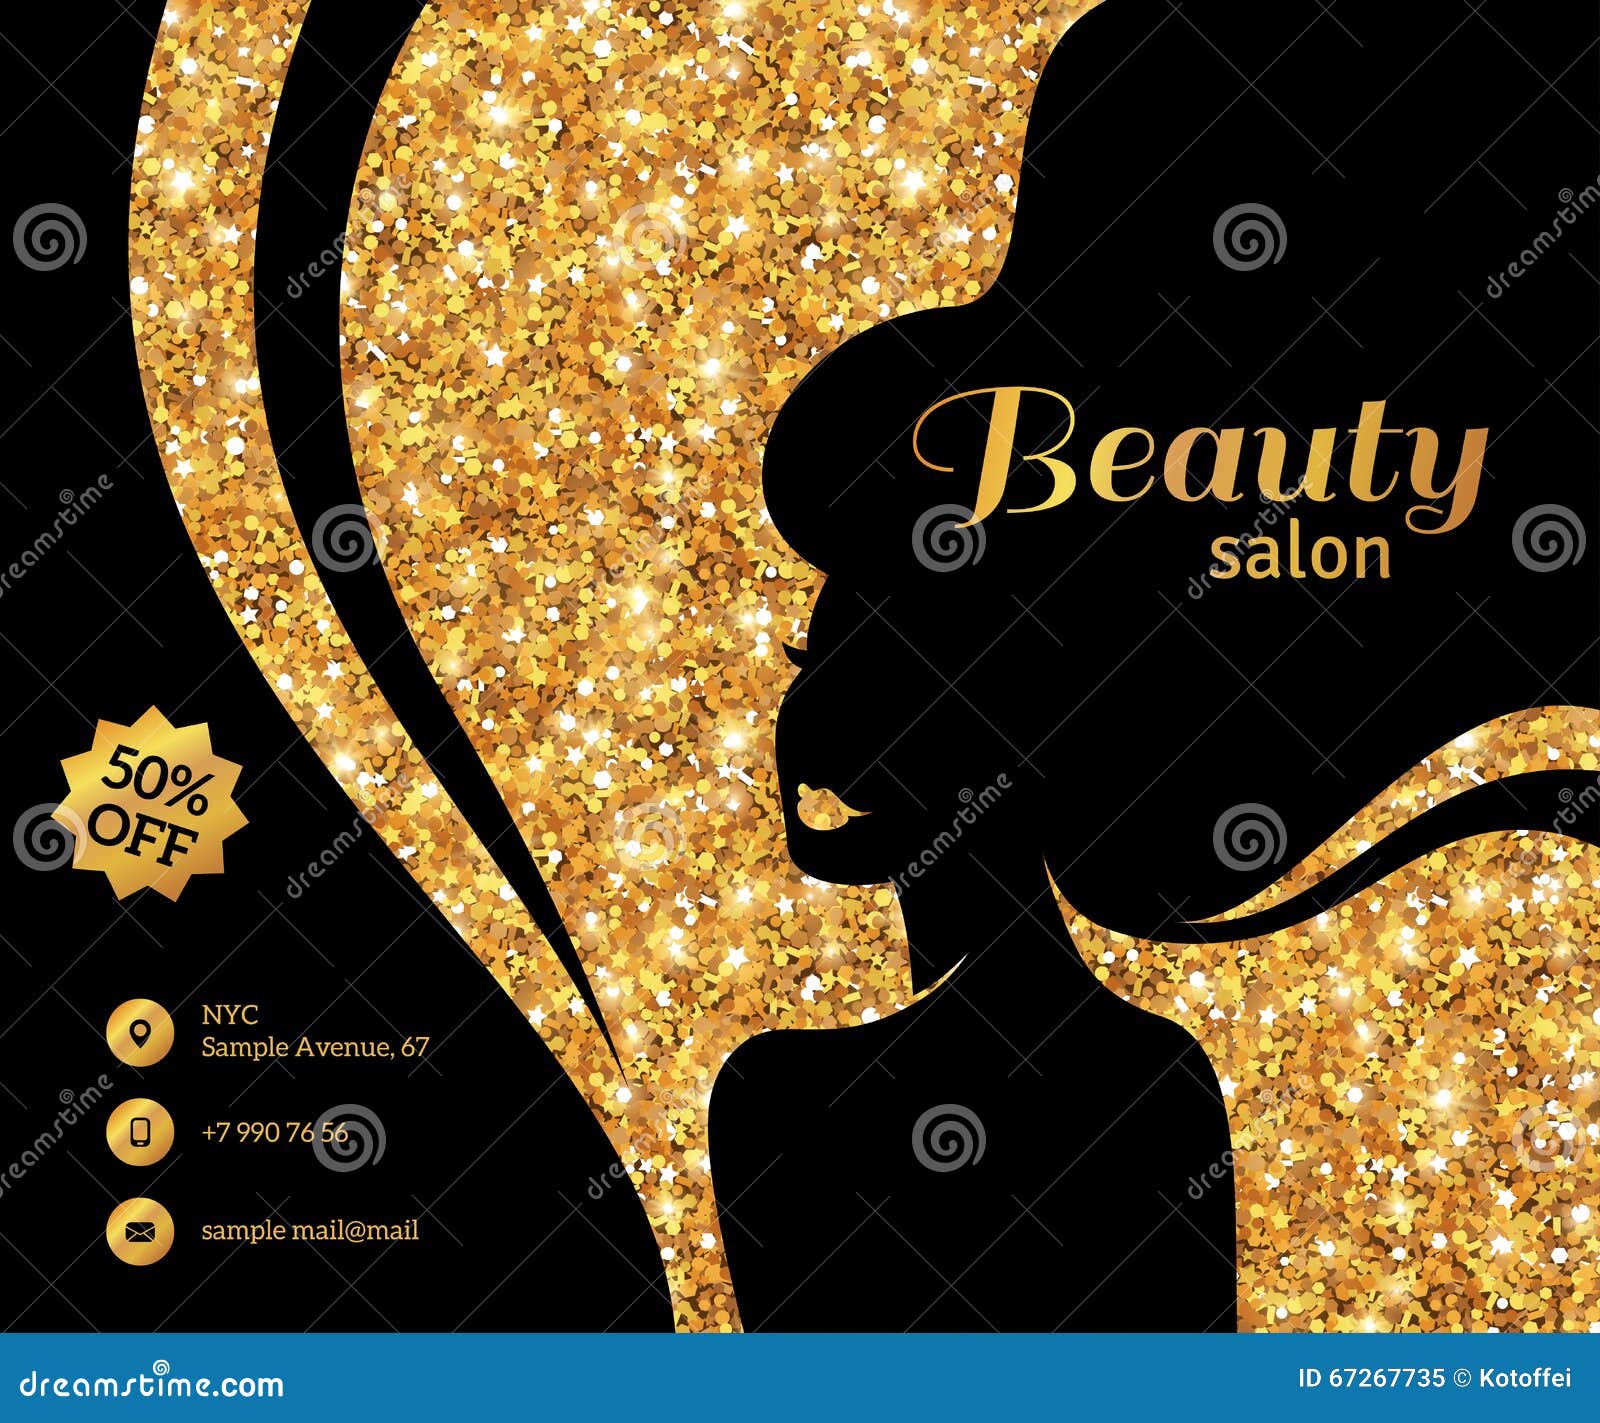 Black and Gold Flyer Fashion Woman Long Hair Stock Vector - Illustration of  decorative, greeting: 67267735